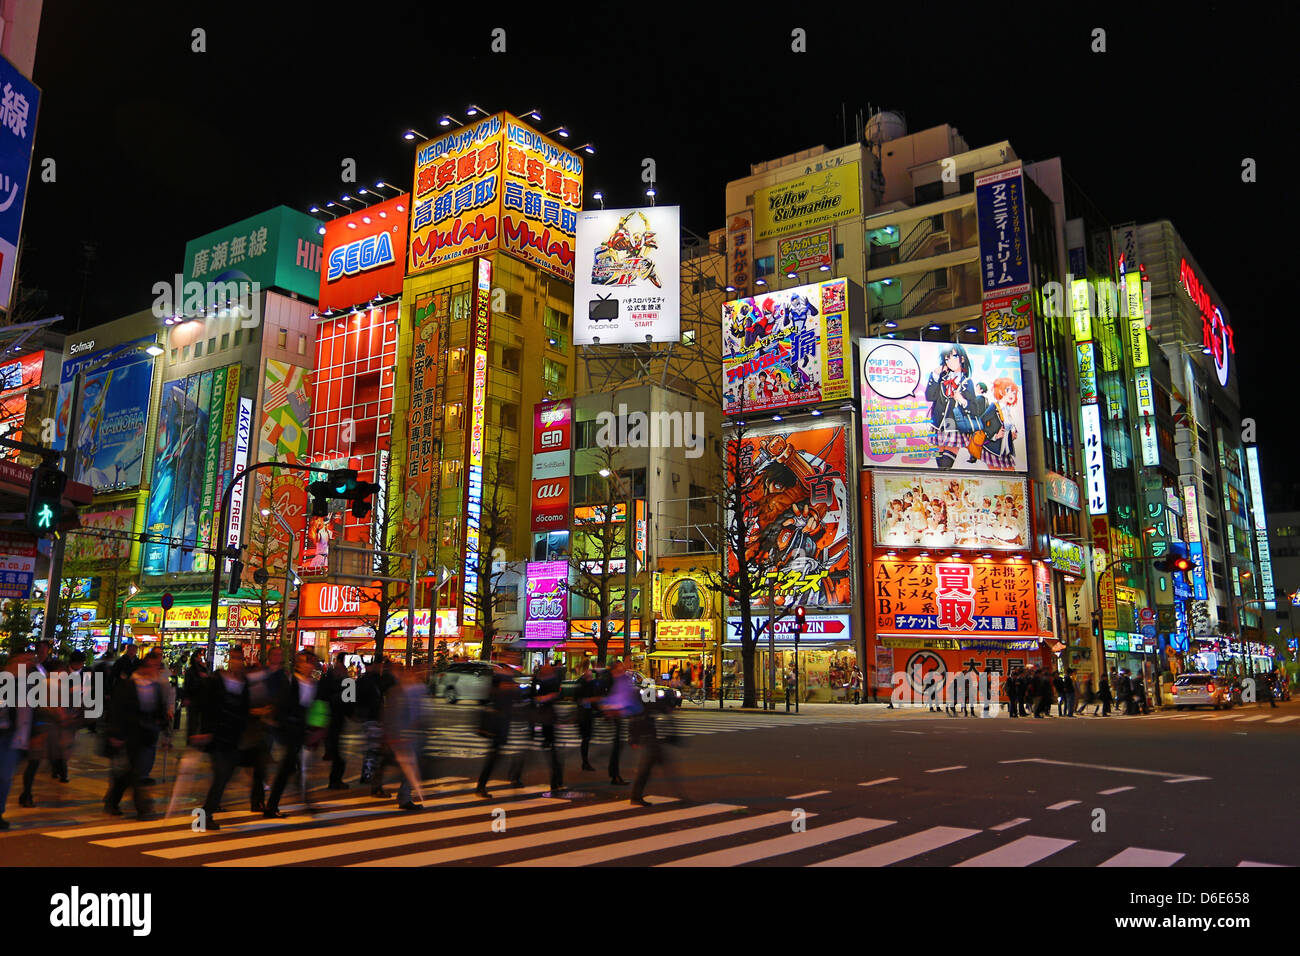 Lights of shops and buildings of Akihabara Electric Town street scene with a pedestrian crossing in Tokyo, Japan Stock Photo